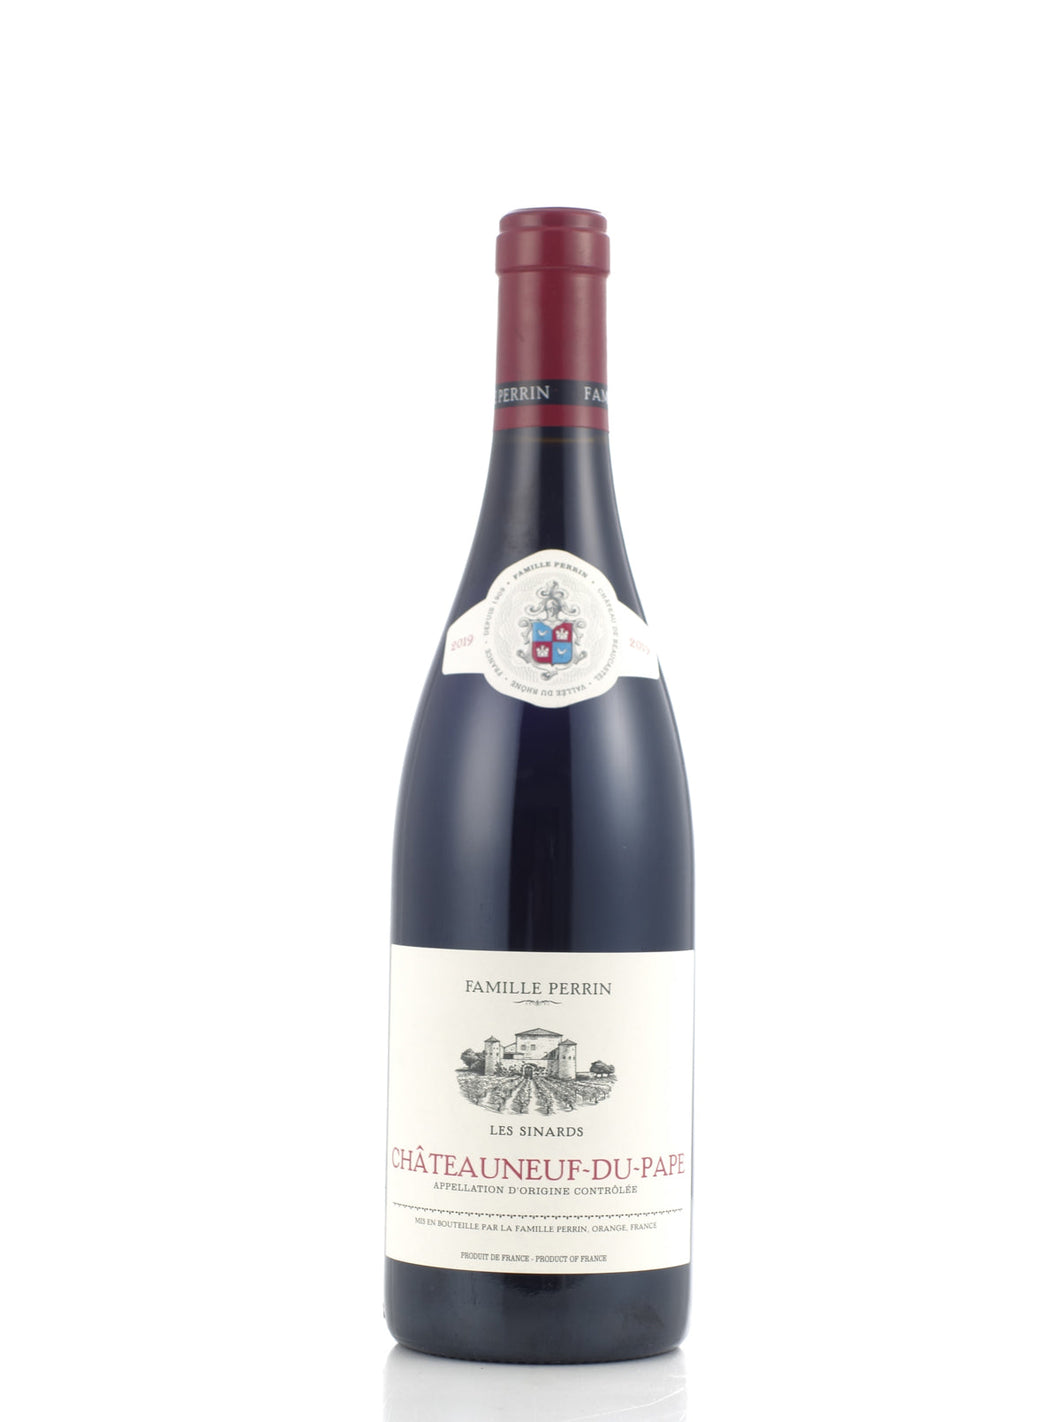 2021 Chateauneuf du Pape Les Sinards, Famille Perrin